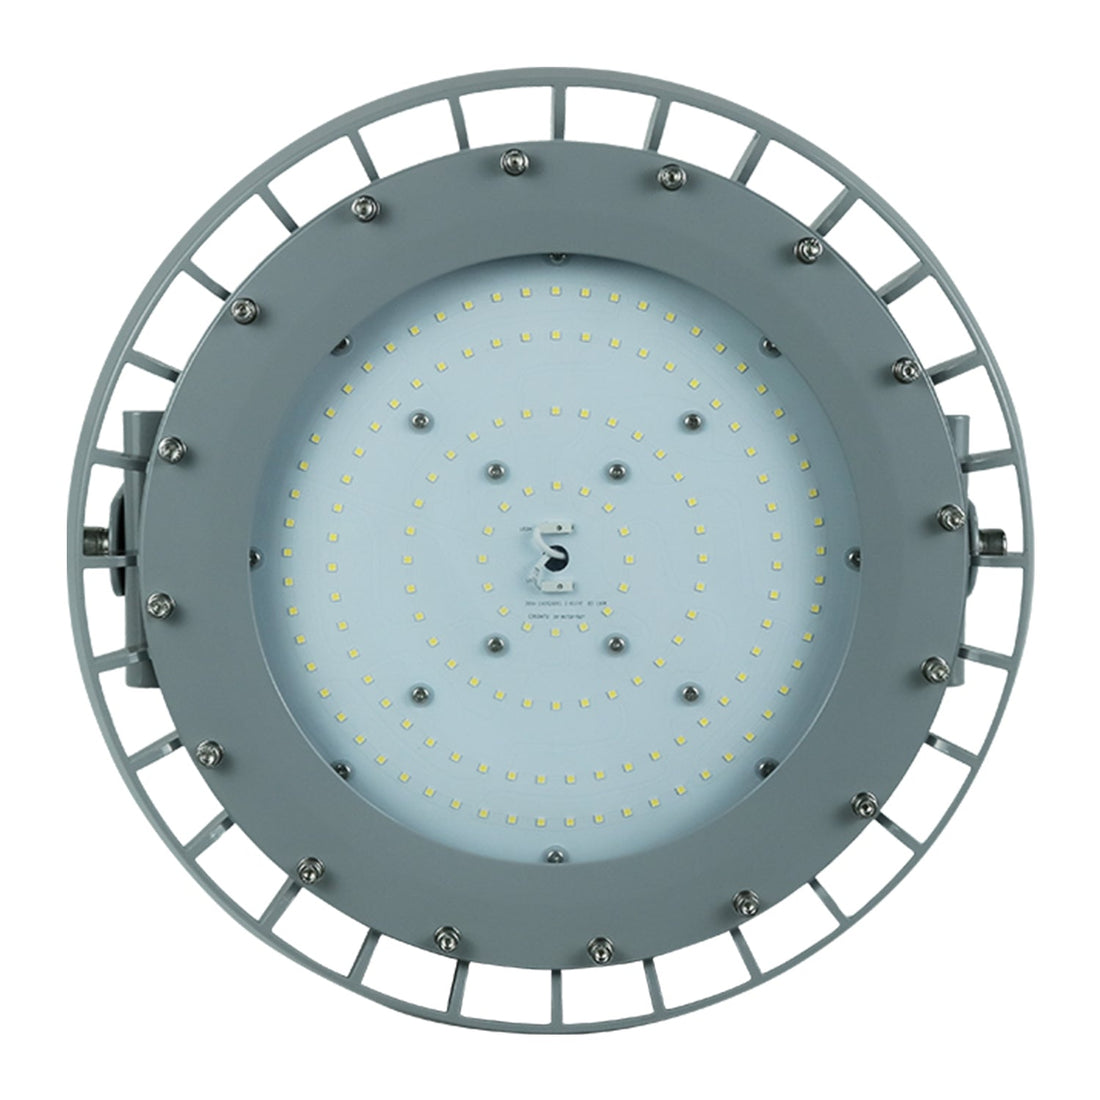 B Series 150W Dimmable LED Explosion Proof Round High Bay Light - 5000K, 20250LM, IP66 Rated for Hazardous Locations